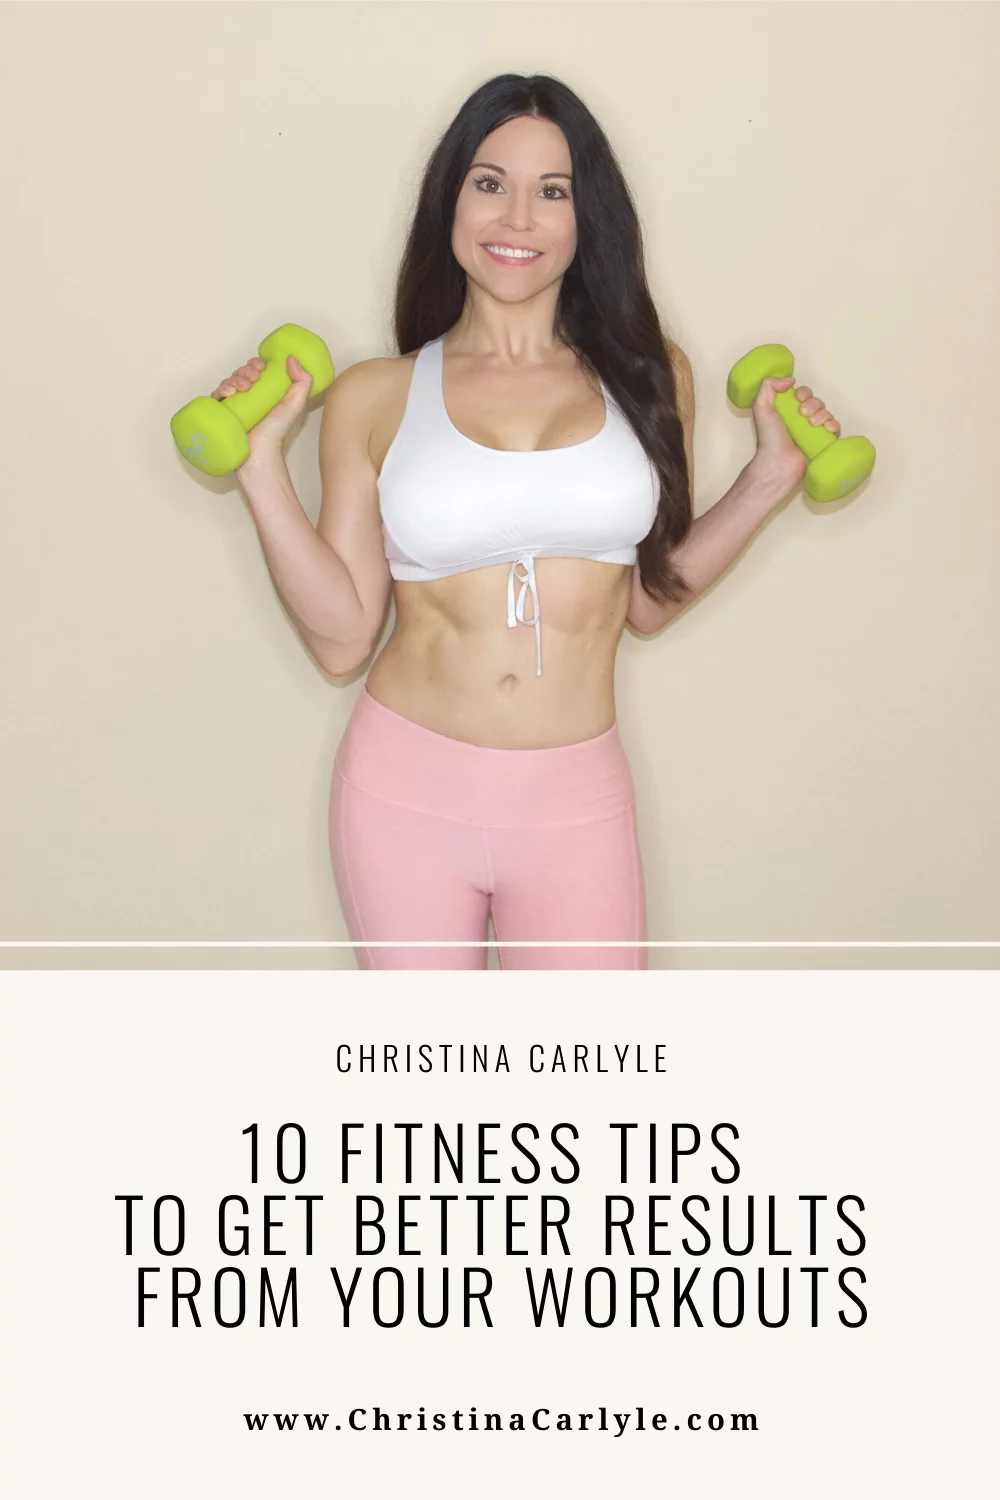 https://www.christinacarlyle.com/wp-content/uploads/2020/06/10-Fitness-Tips.png